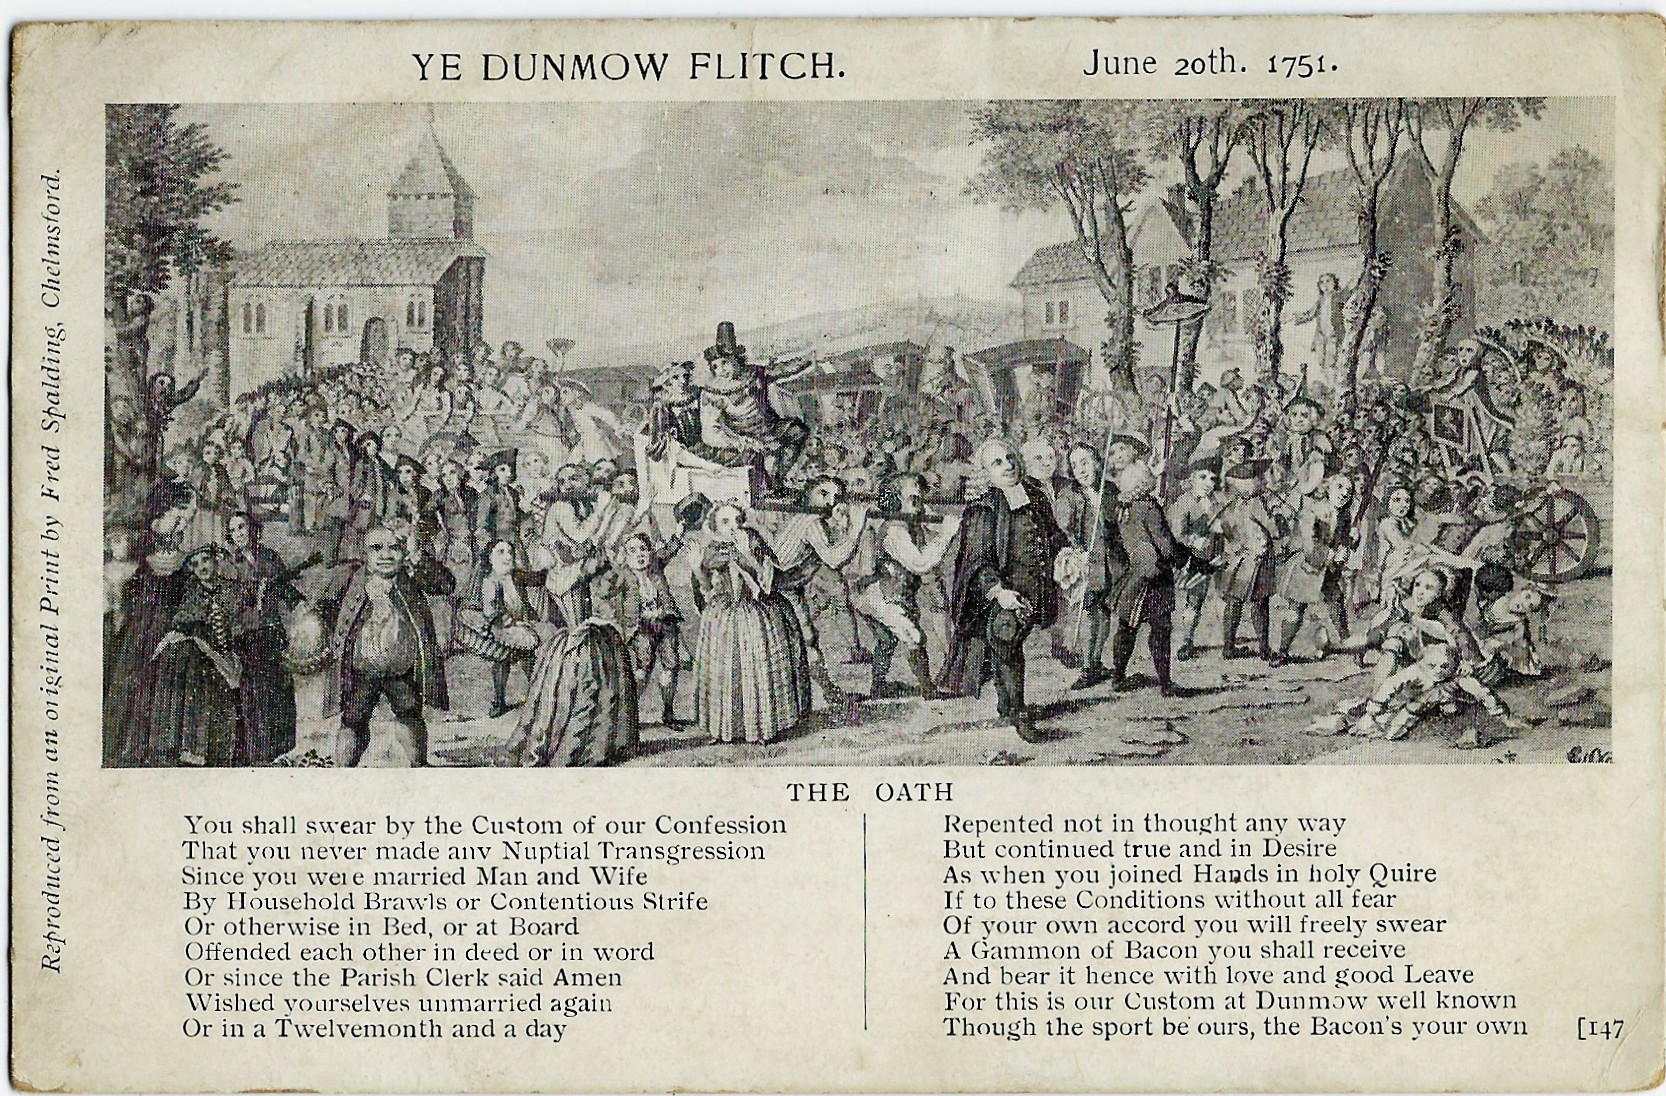 Ye Dunmow Flitch The Oath June 20th 1751 - May 24 1904